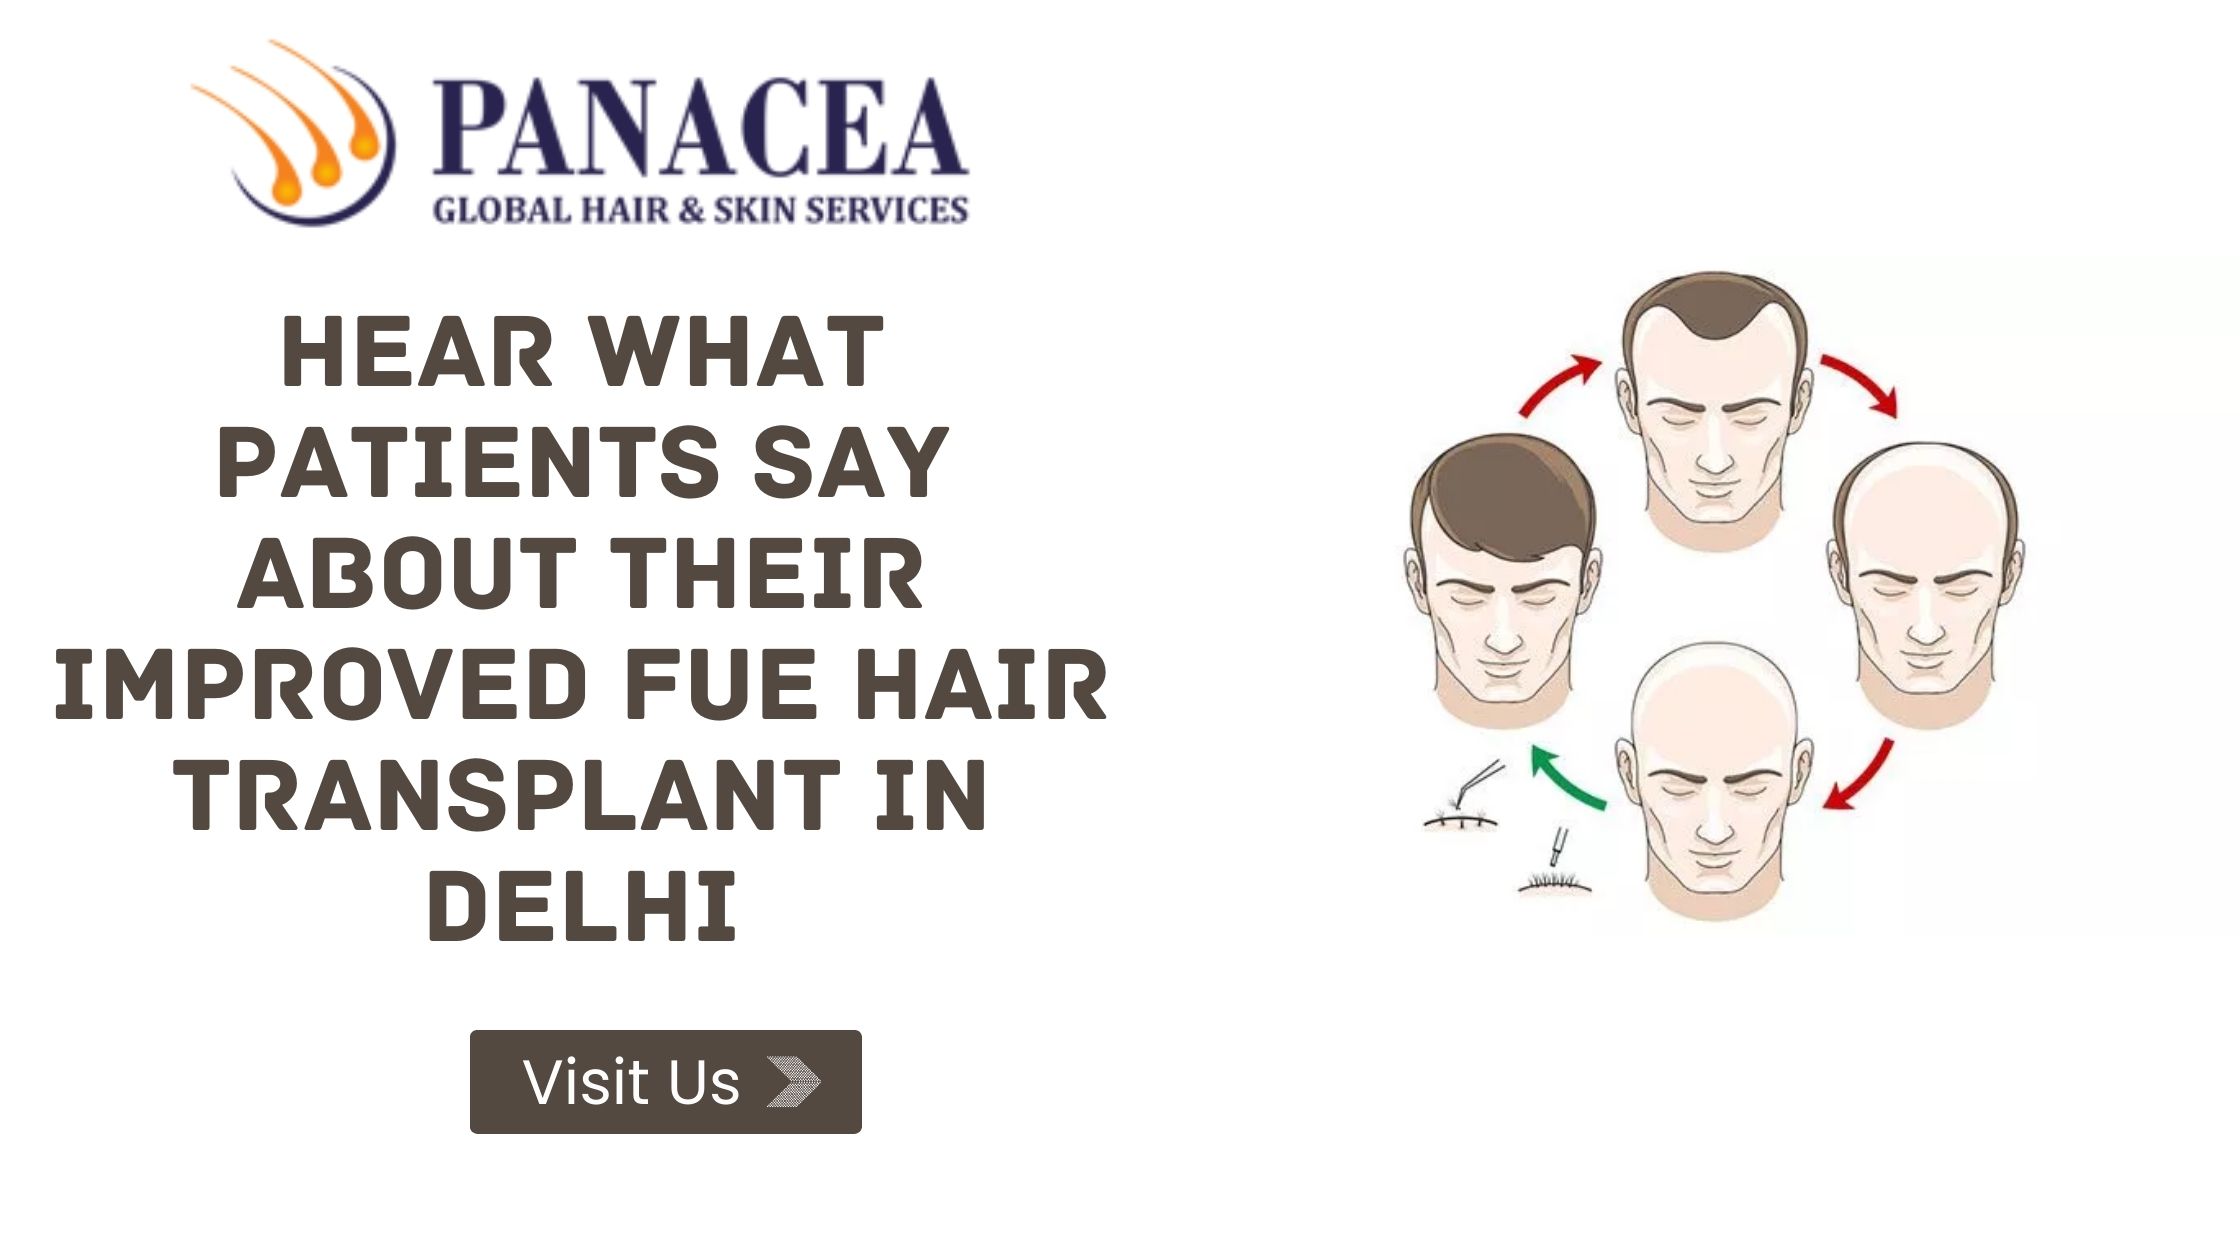 Hear What Patients Say About Their Improved FUE Hair Transplant in Delhi